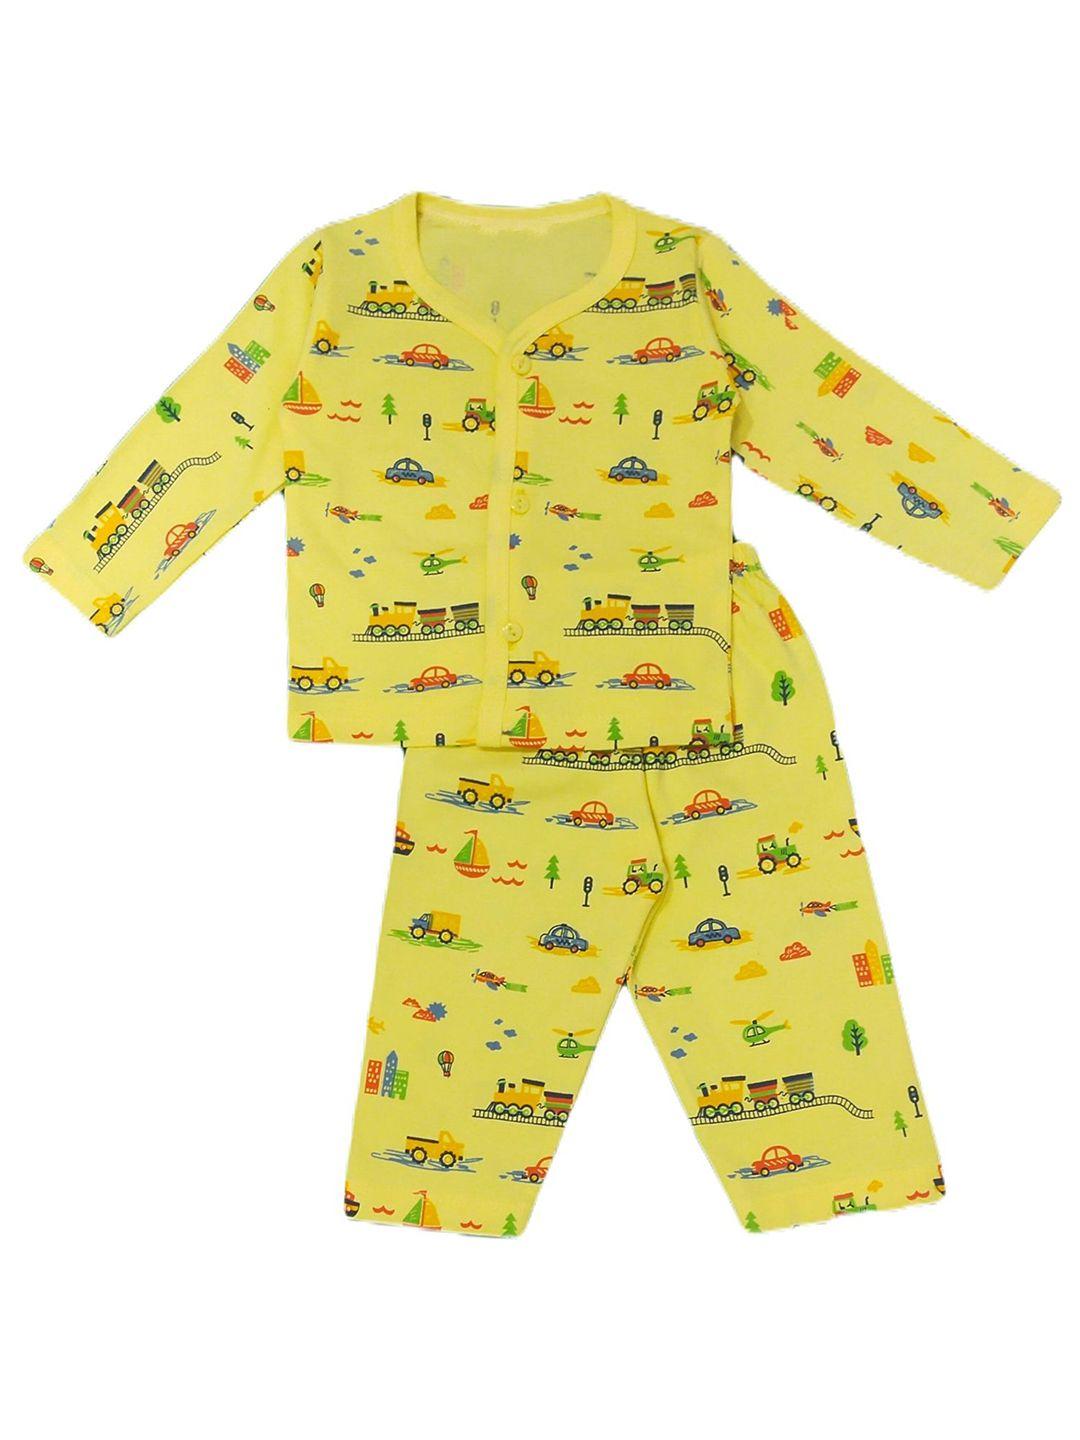 baesd-infants-printed-pure-cotton-shirt-with-trousers